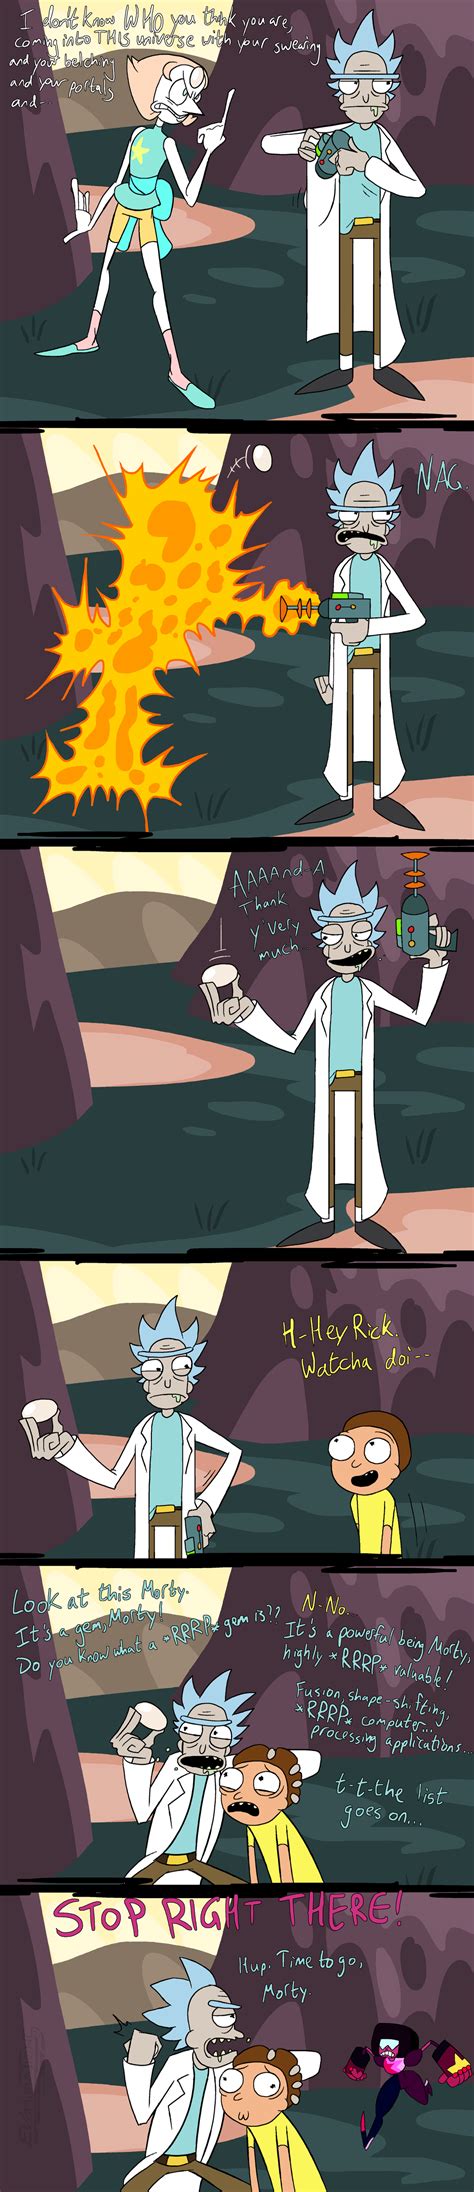 Rick And Morty Steven Universe Crossover By Evanimationsdeviantart